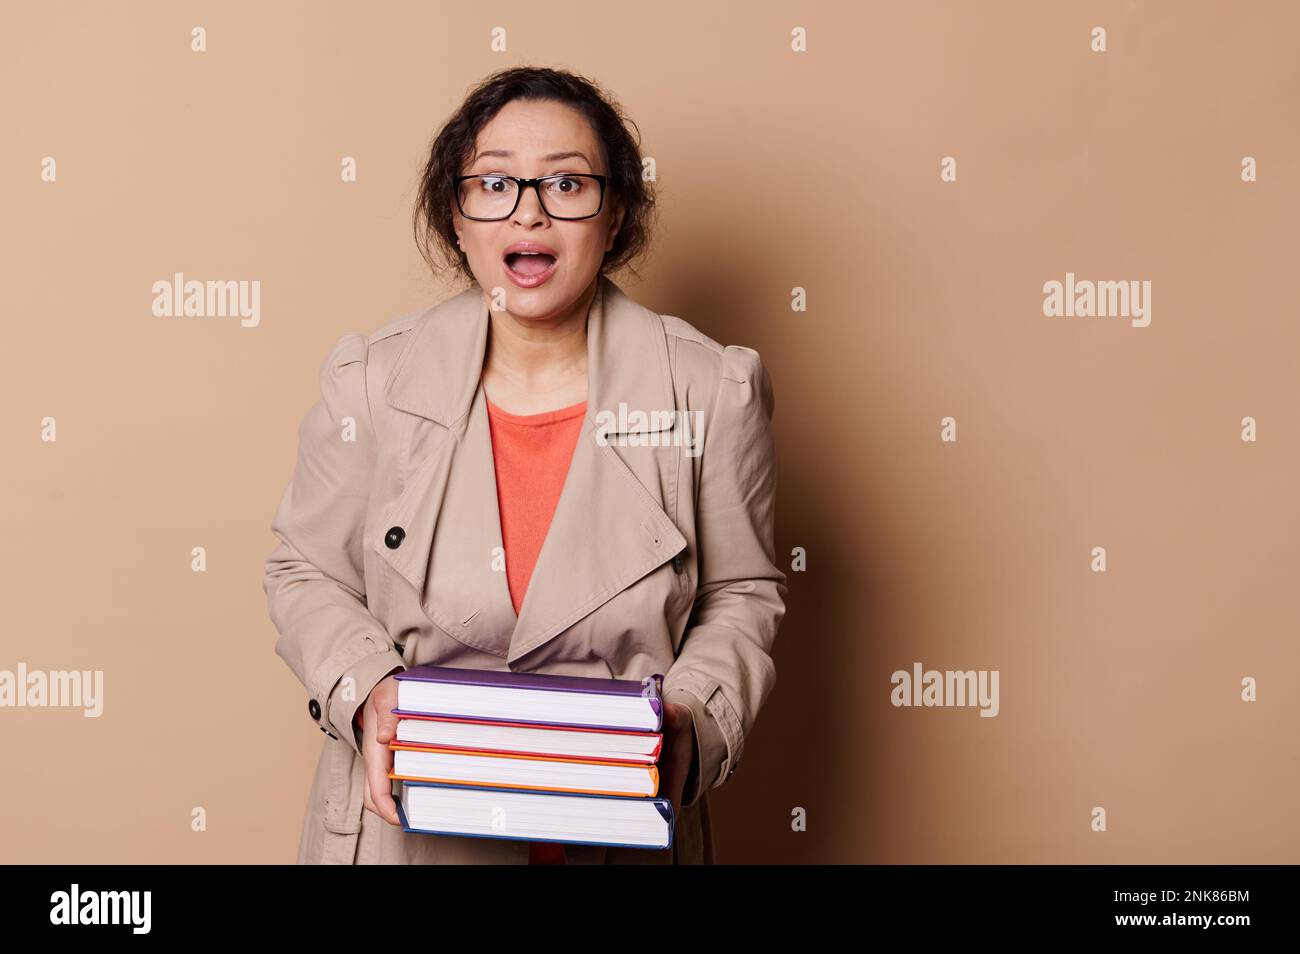 Astonished woman school teacher holds heavy volumes of hardcover books, expresses stupefaction at camera, cream backdrop Stock Photo